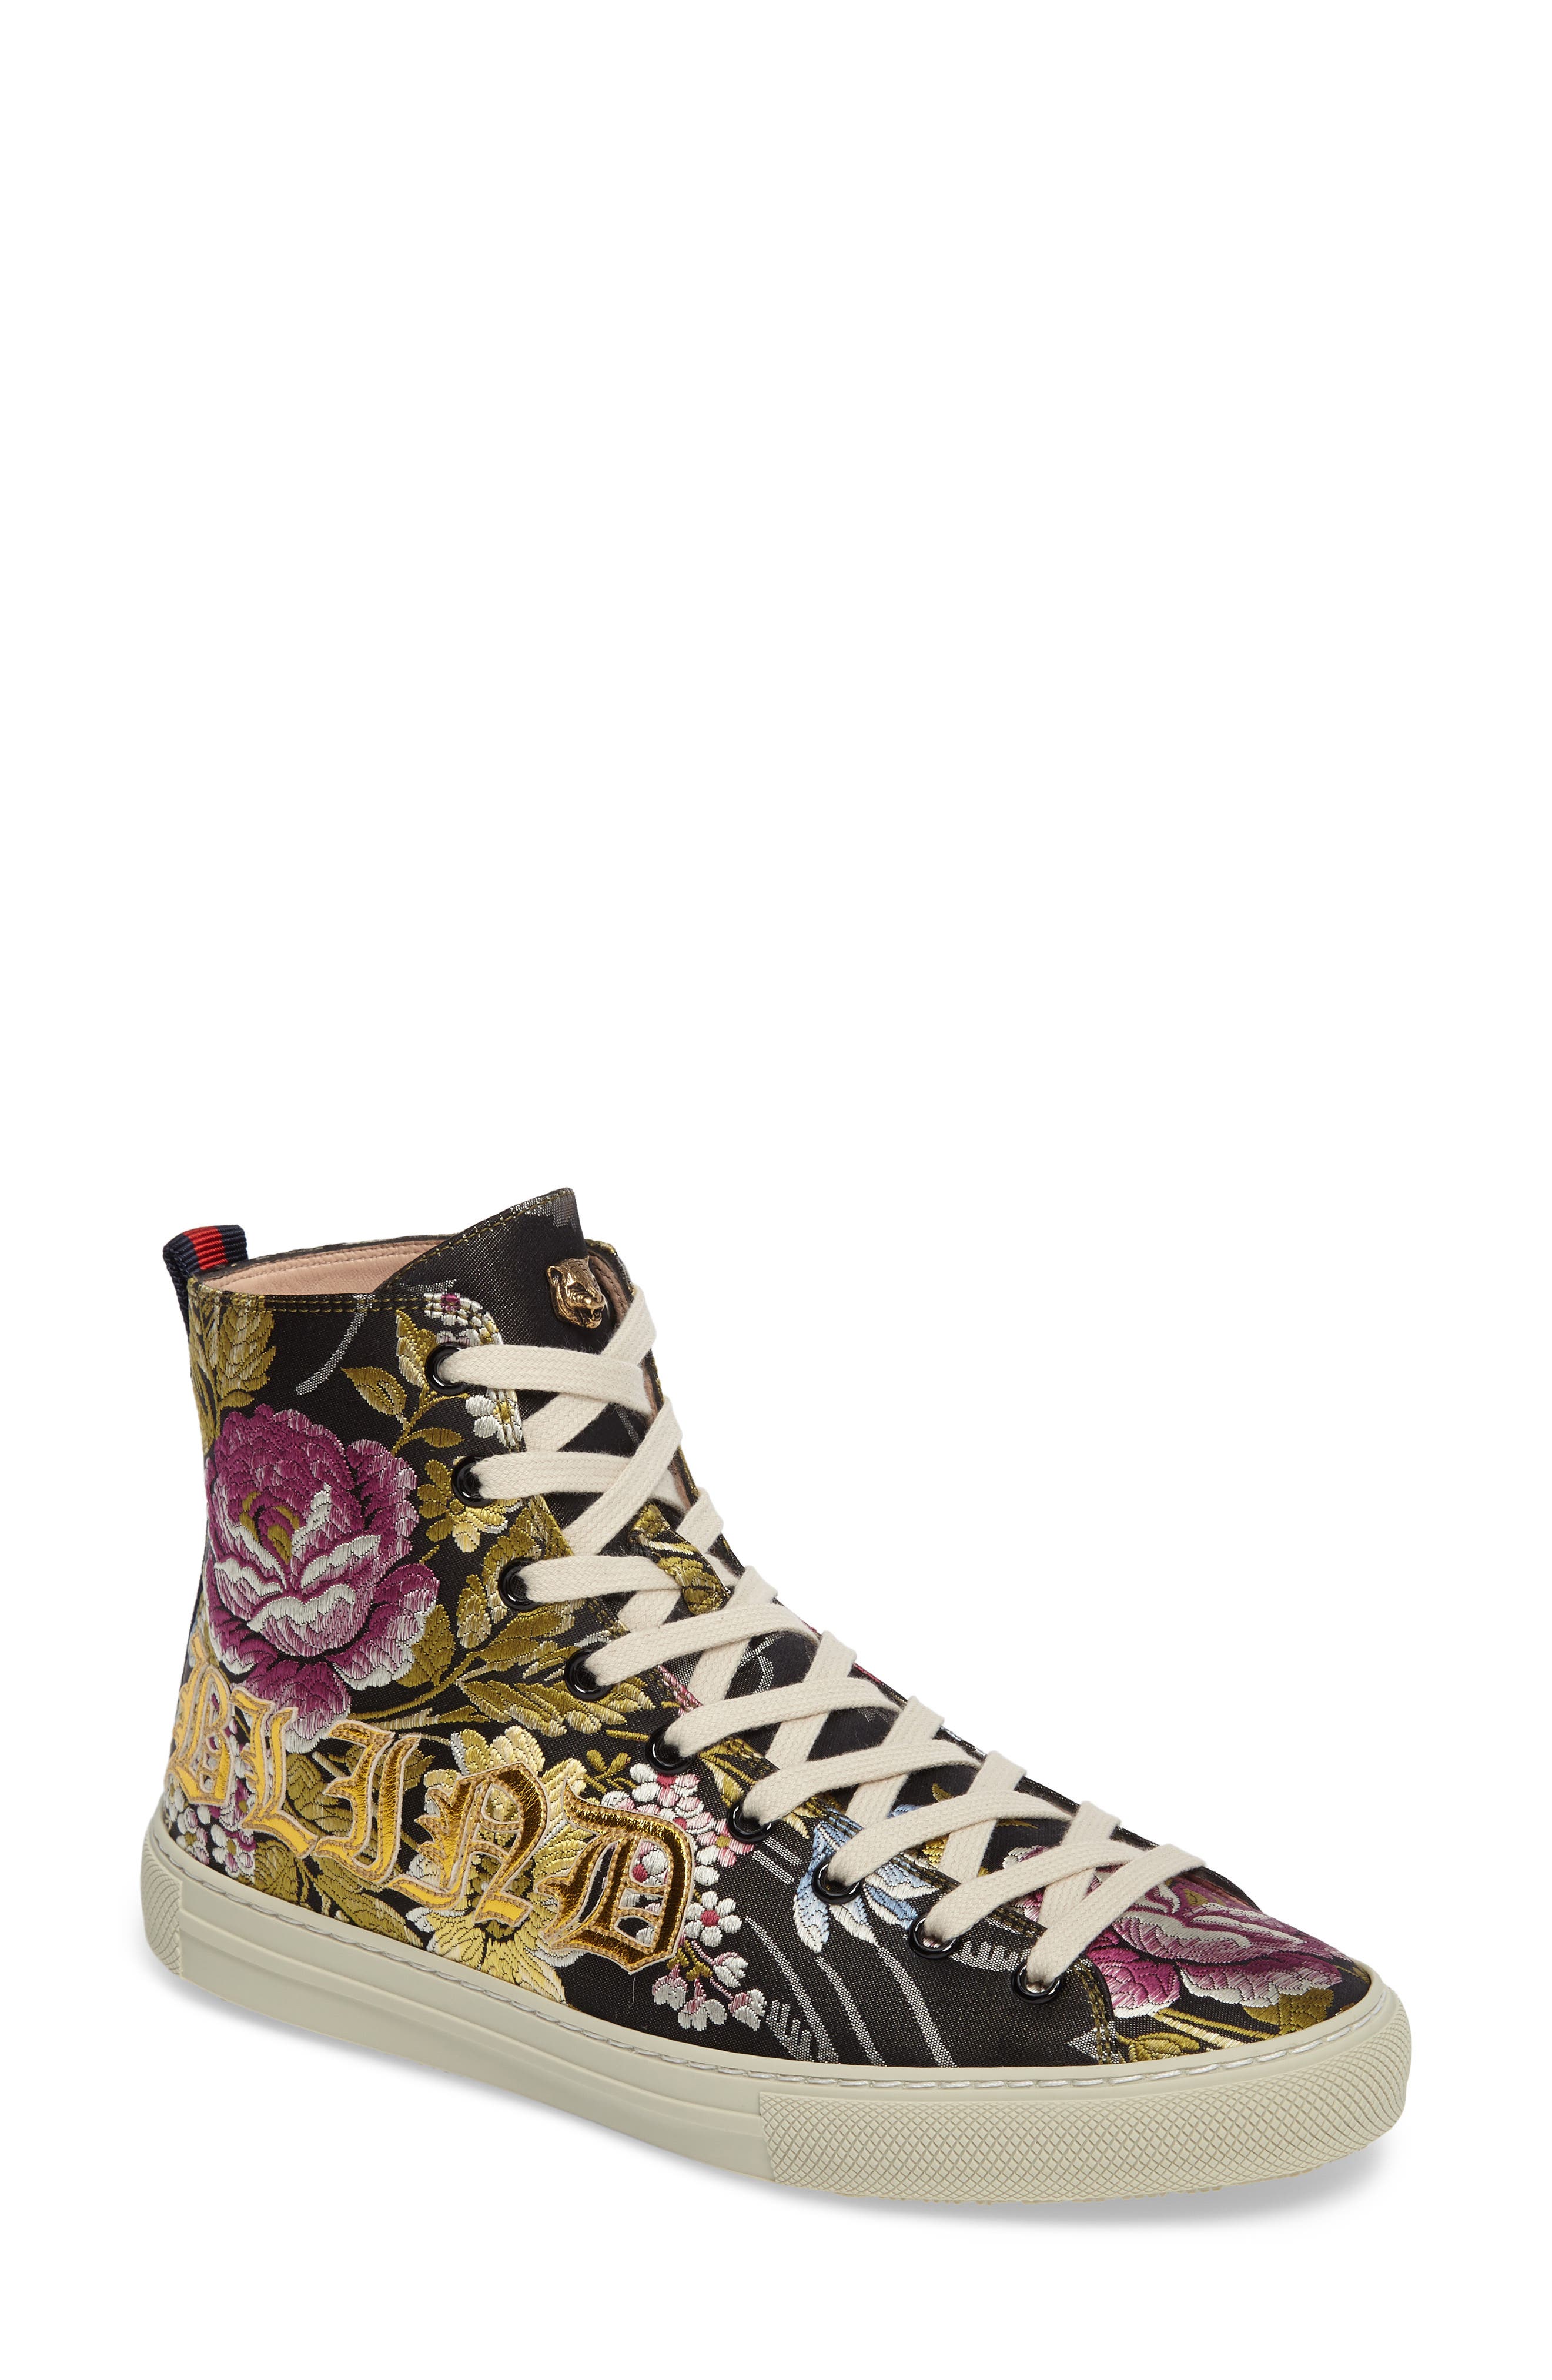 GUCCI | Floral High Top Sneaker 